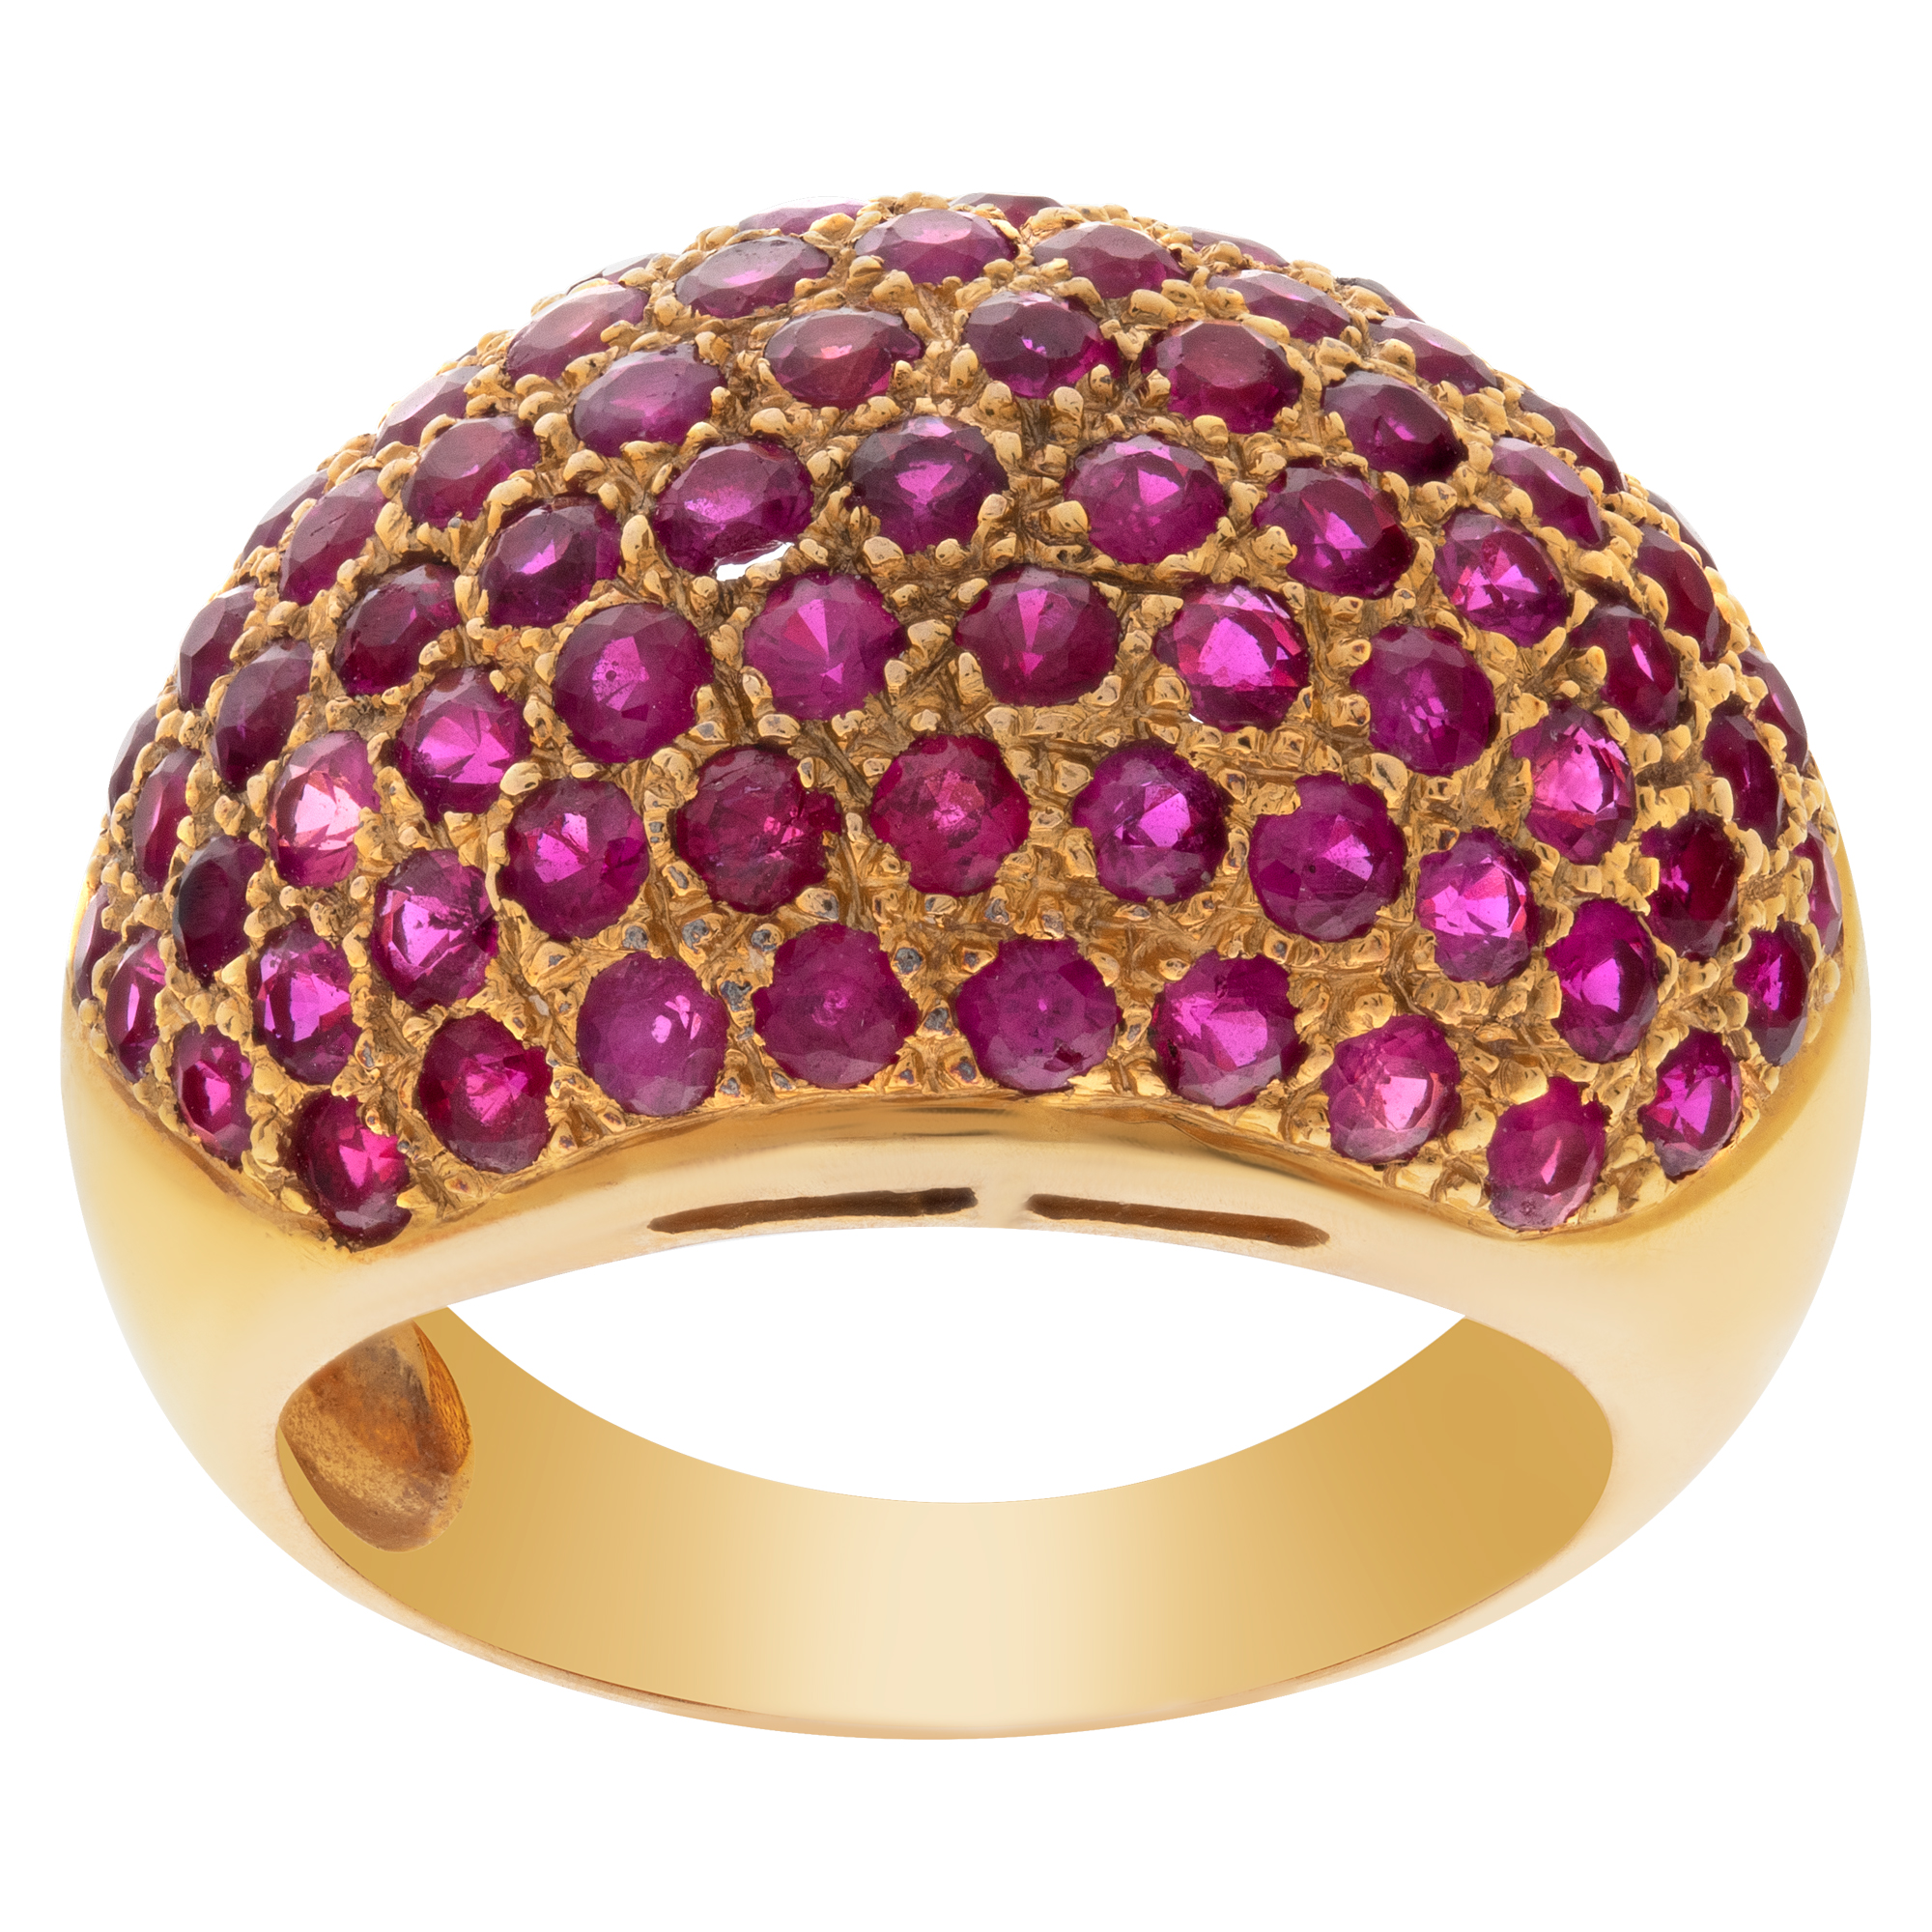 Round brilliant cut rubies set in 18K rose gold ring. Total rubies approximate weight: 3.0 carats.